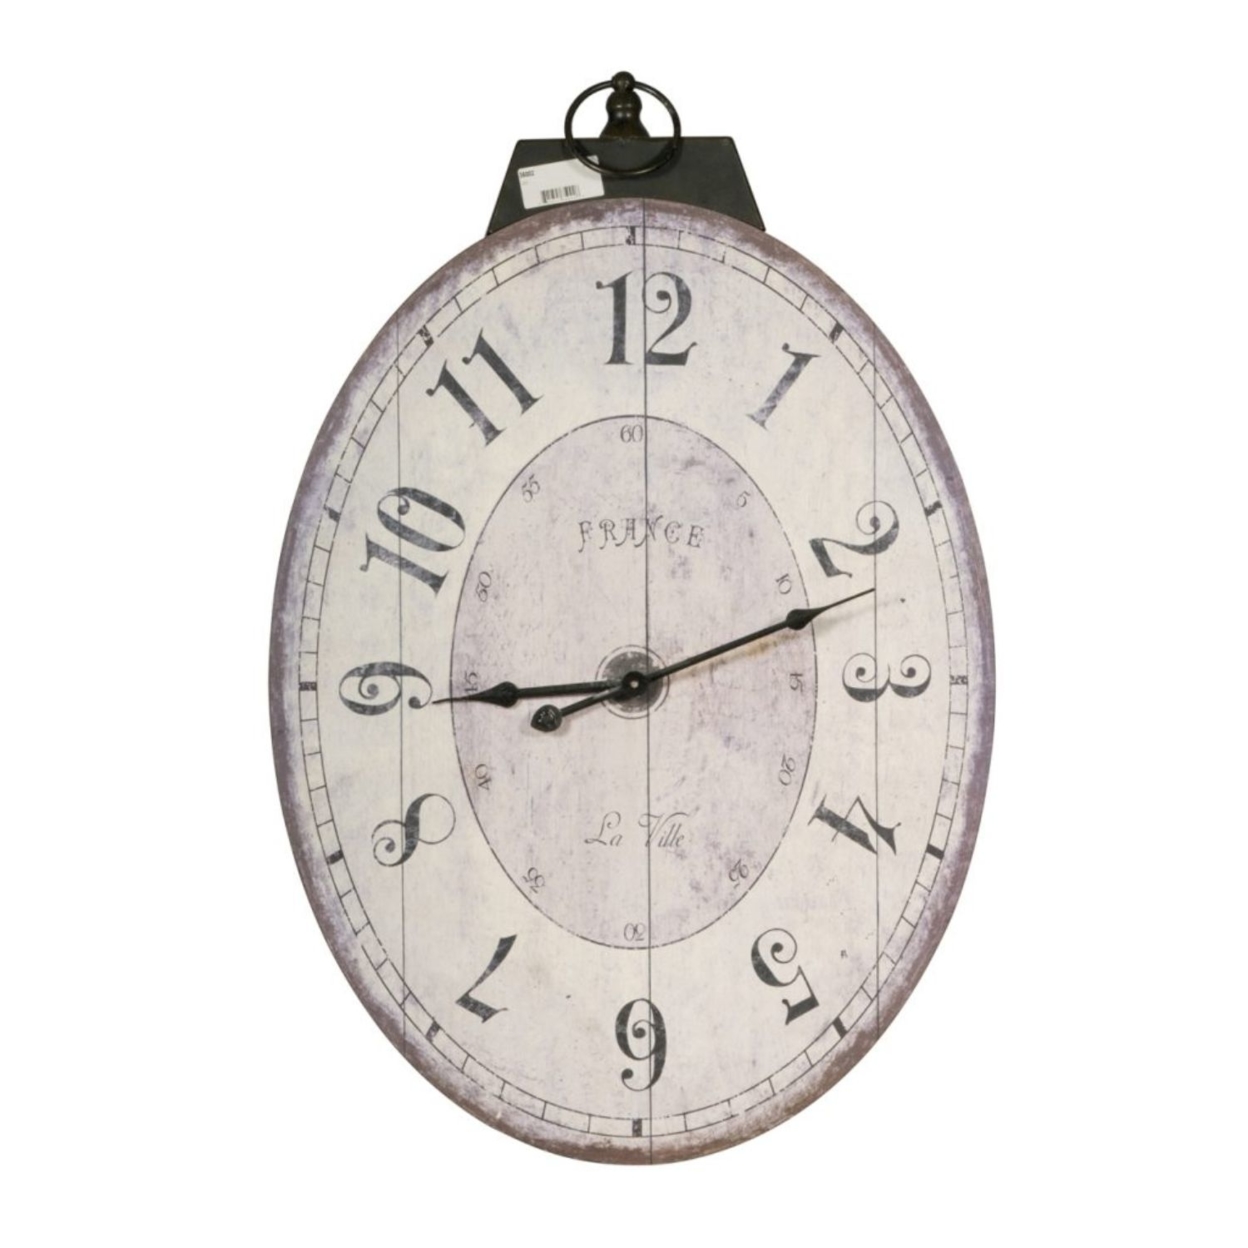 Distressed Oval Shape Wooden Wall Clock With Ring Hanger, White And Black- Saltoro Sherpi